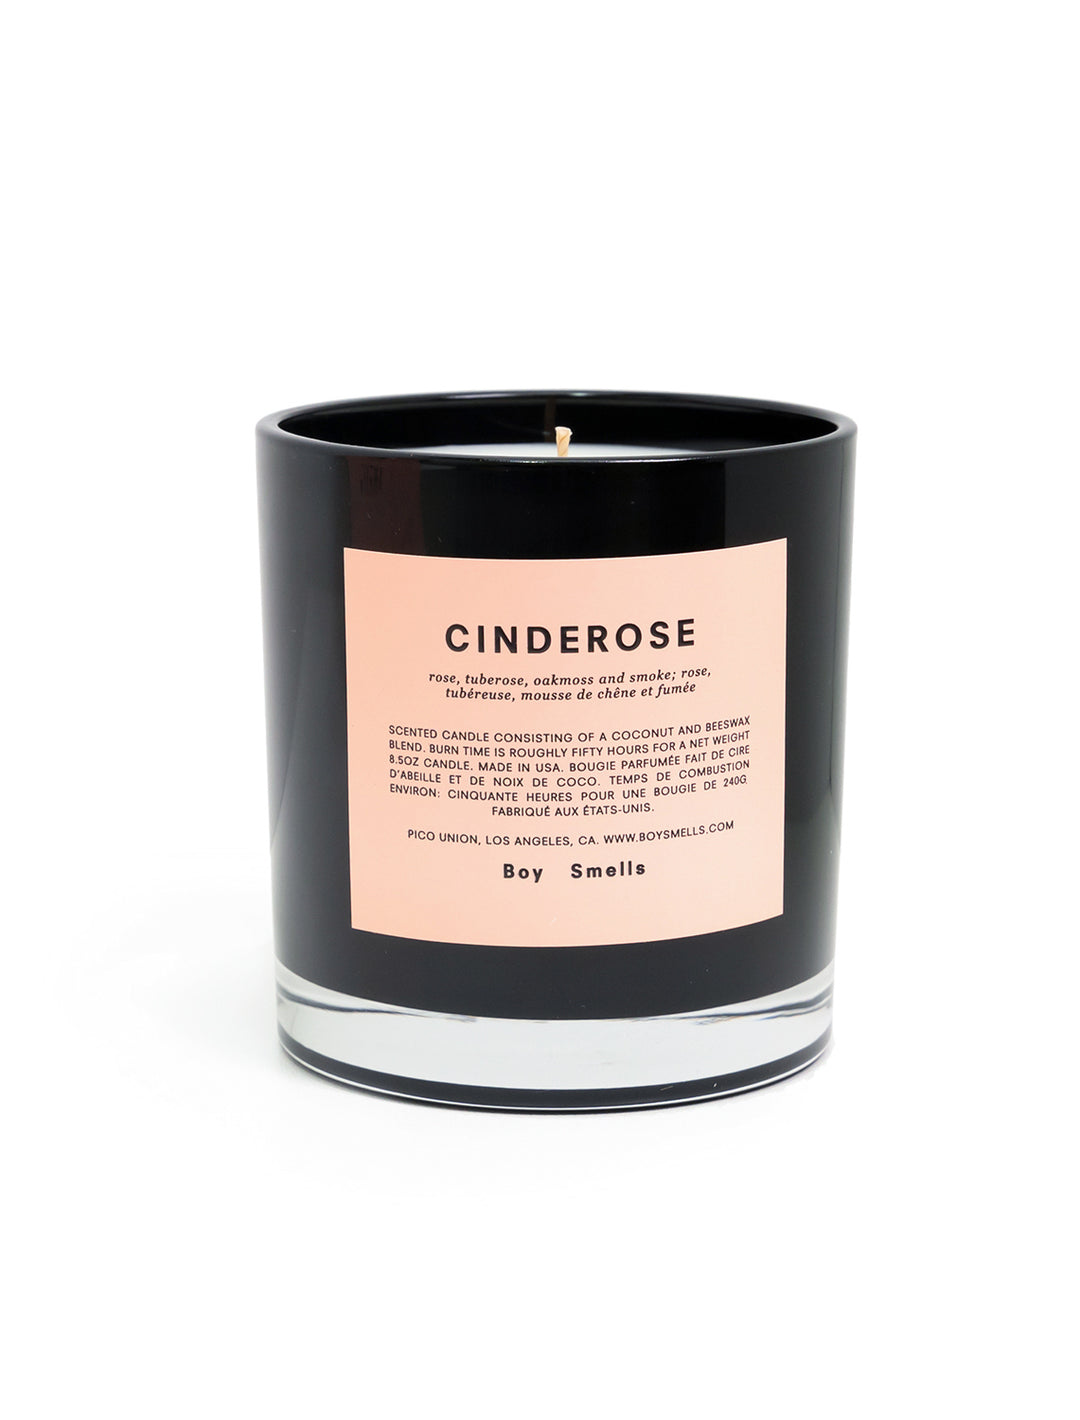 Front view of Boy Smells' Cinderose candle.